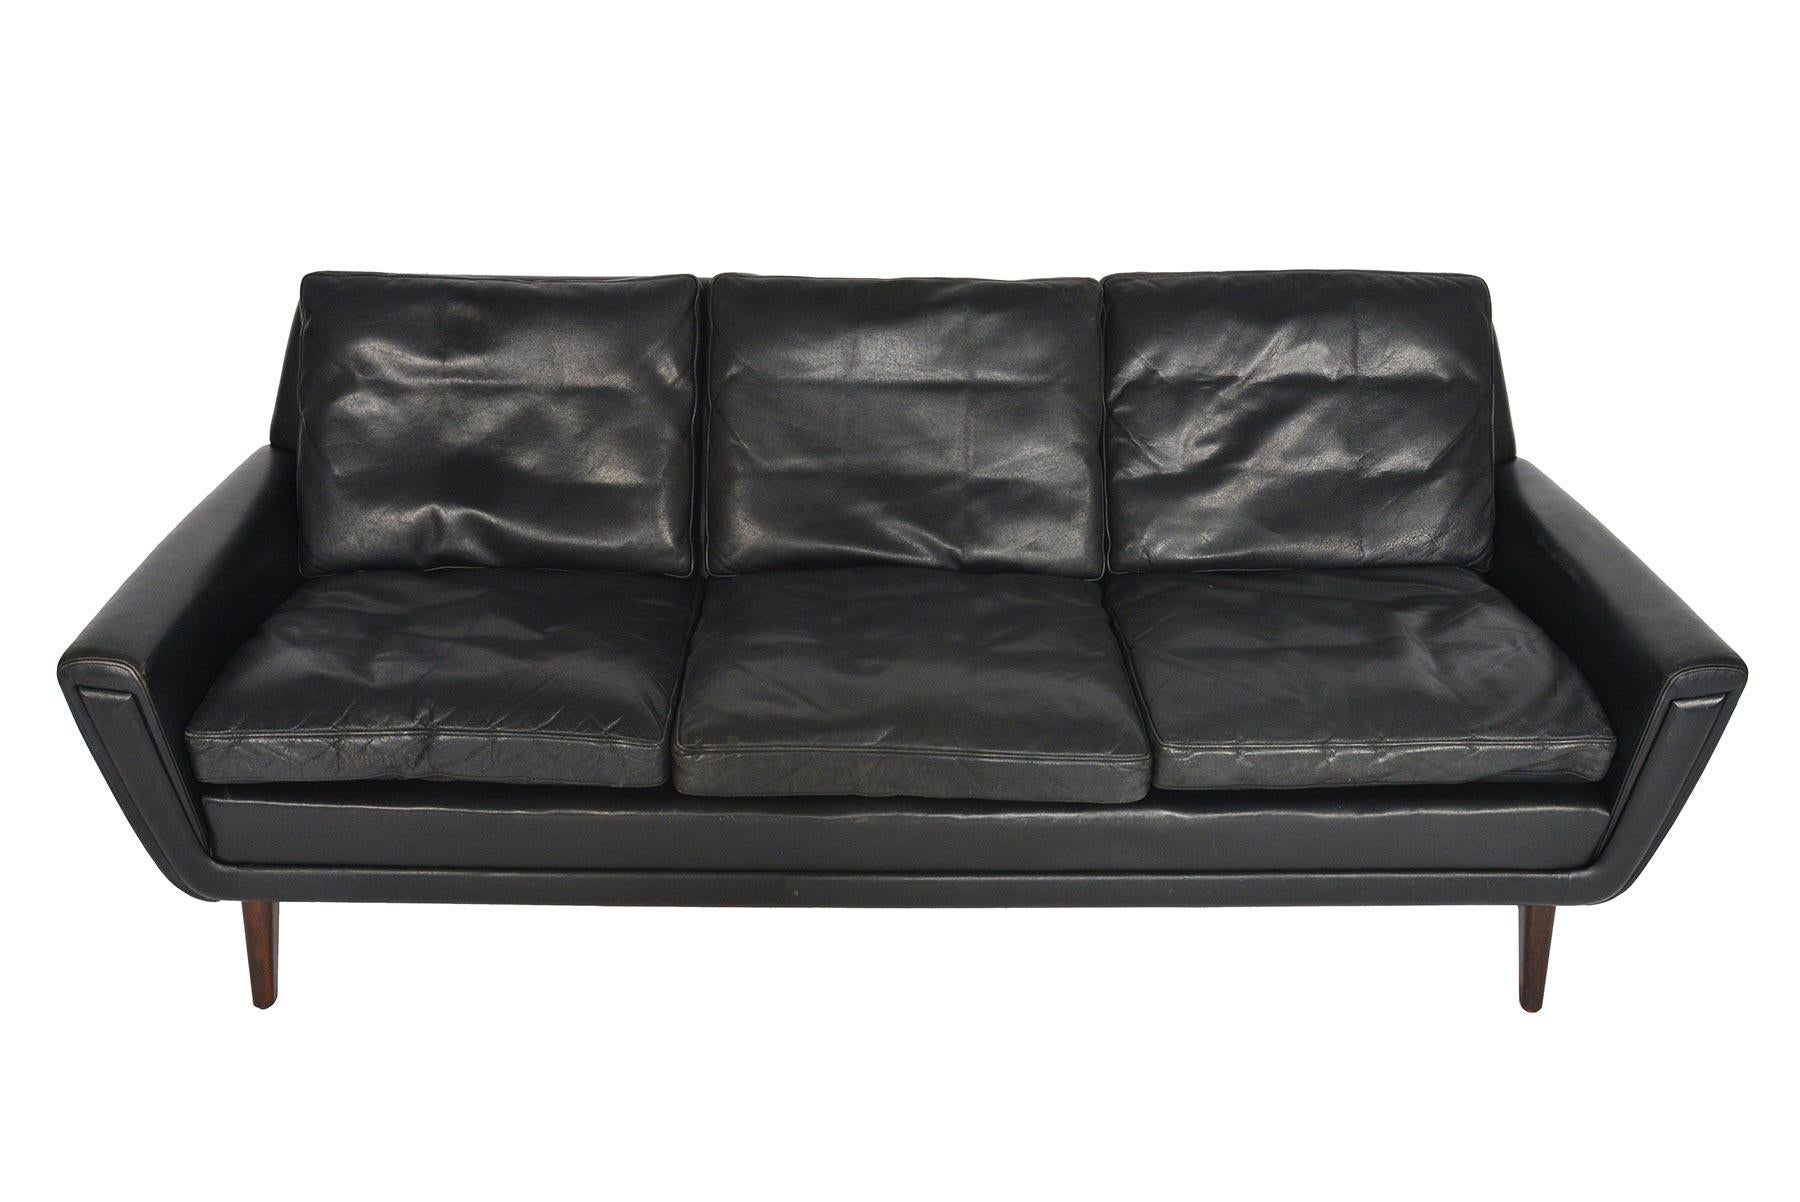 This Danish modern three-seat sofa in black leather hails from the 1960s and will blend perfectly with any modern decor. The gondola style frame features atomic armrests that organically flow from either side. Six down- filled leather cushions sit